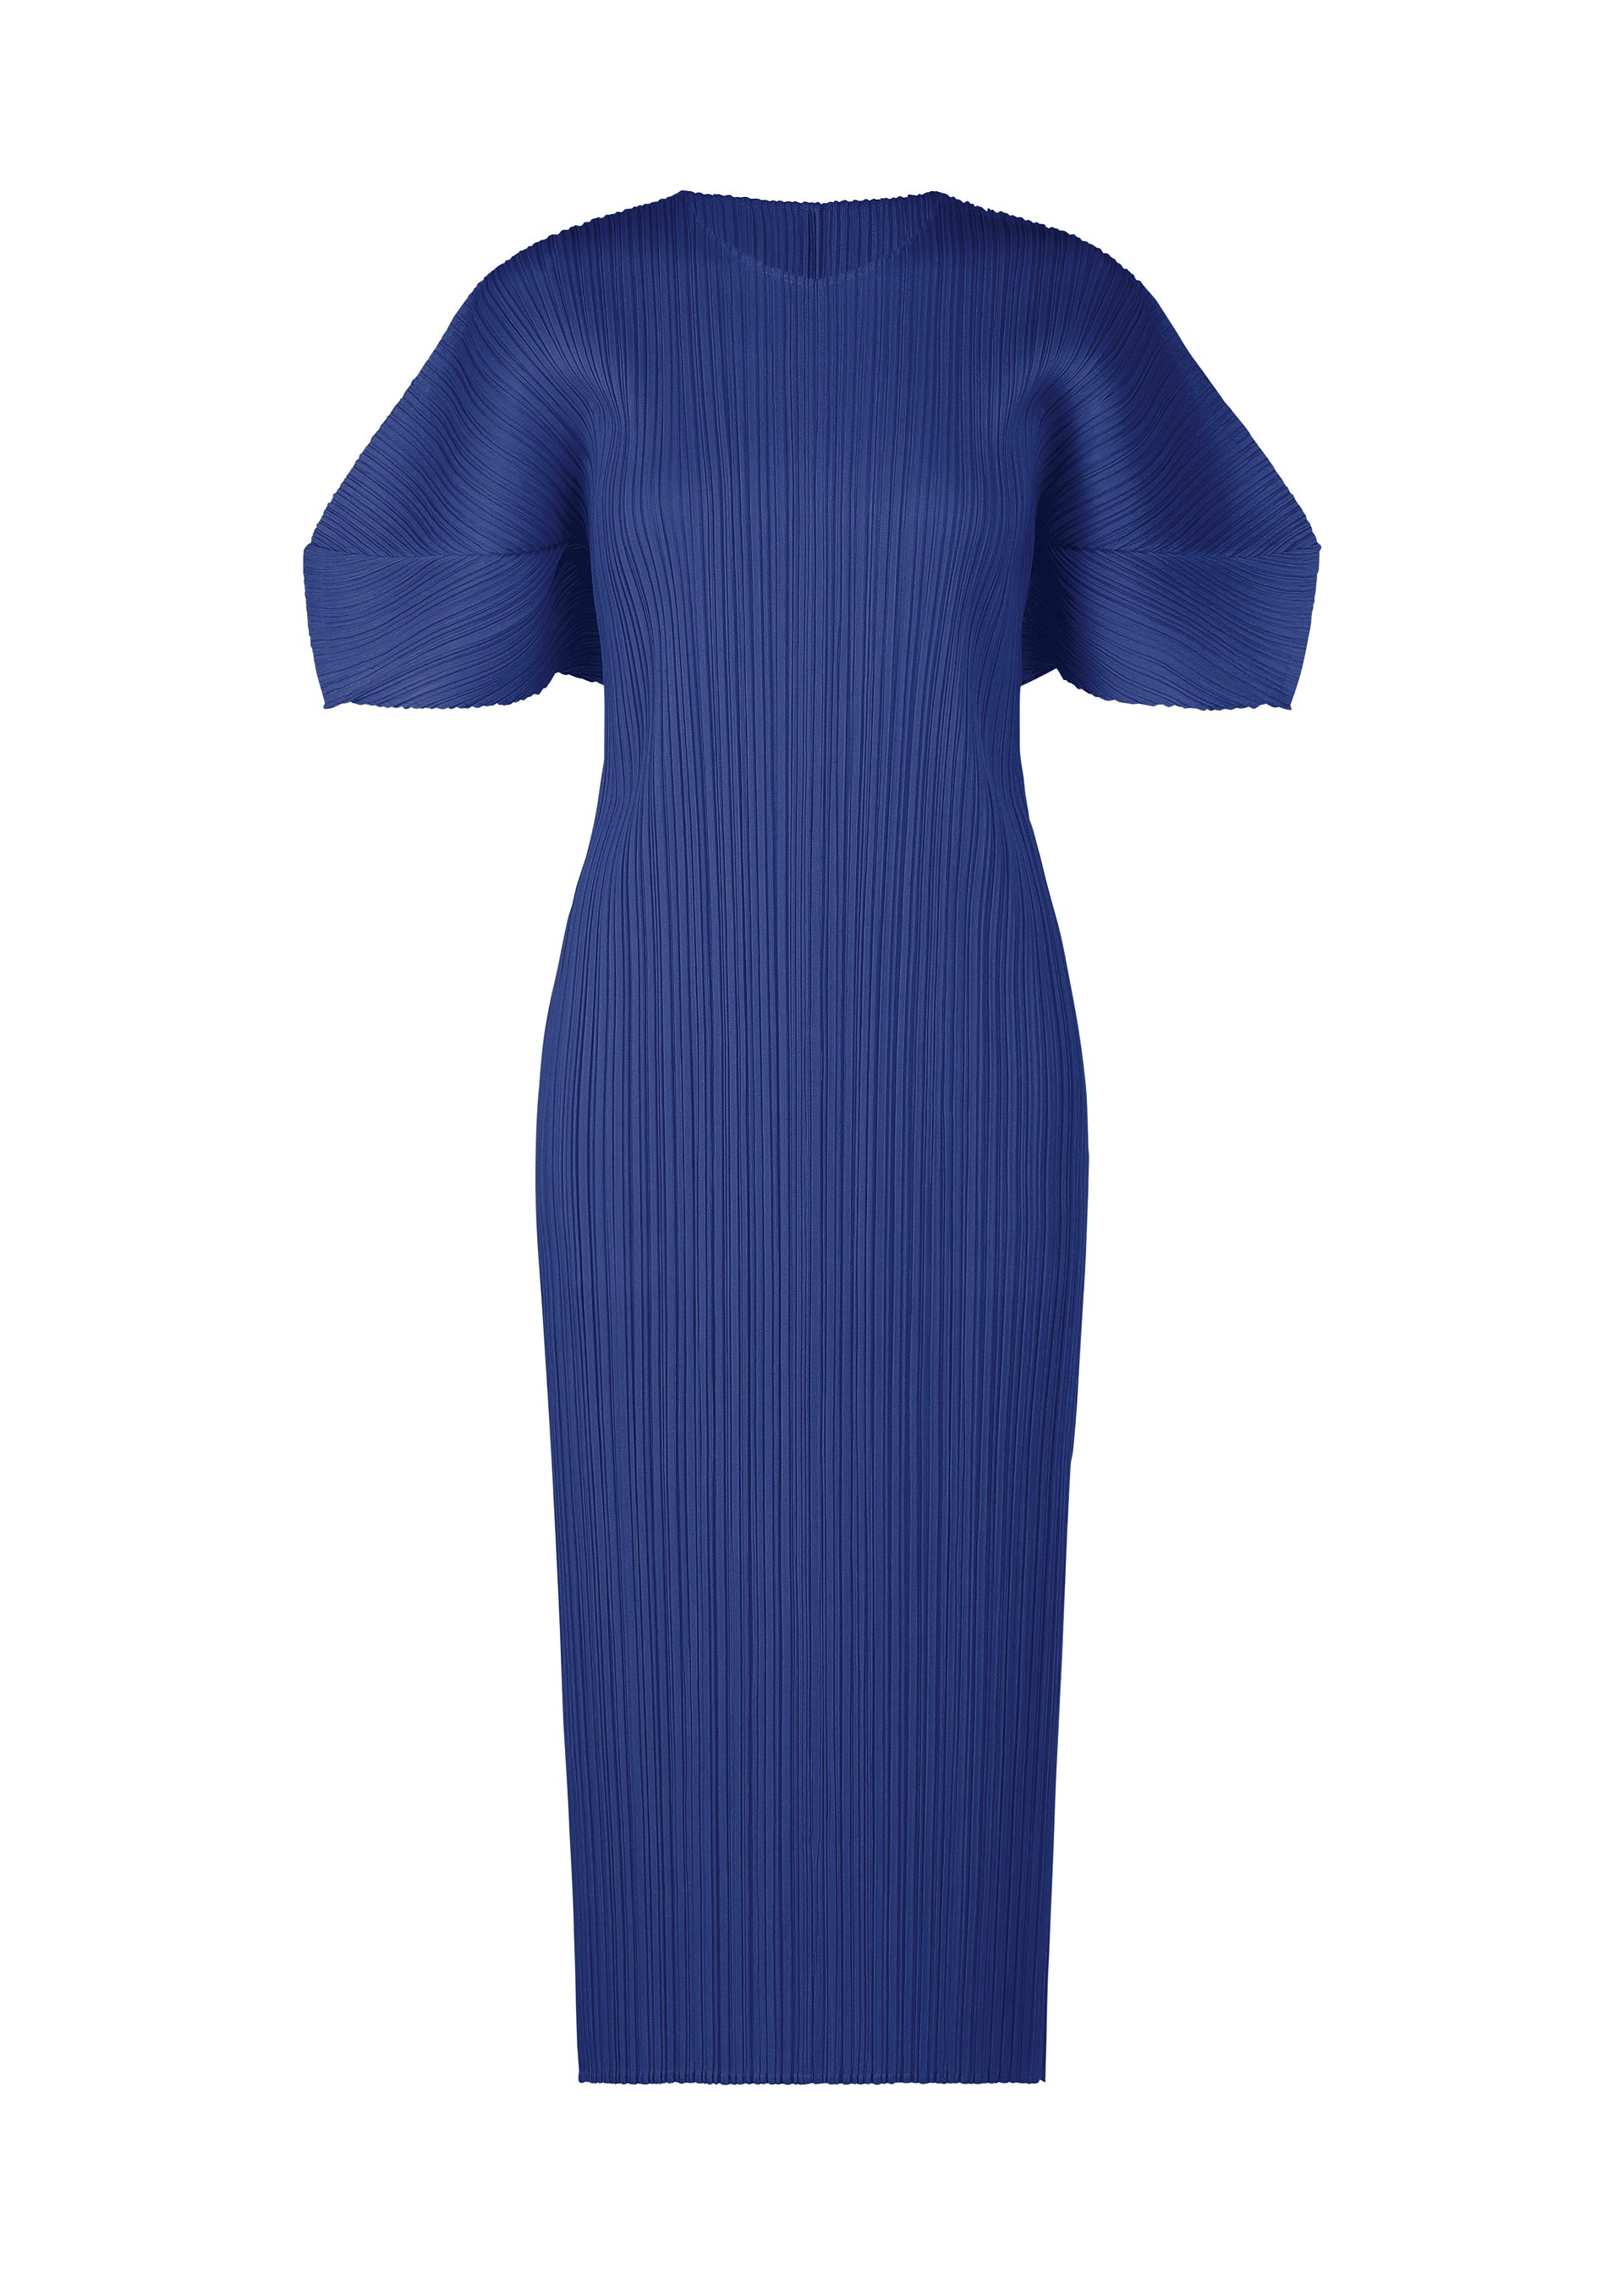 MONTHLY COLORS : AUGUST Dress Deep Blue | ISSEY MIYAKE EU